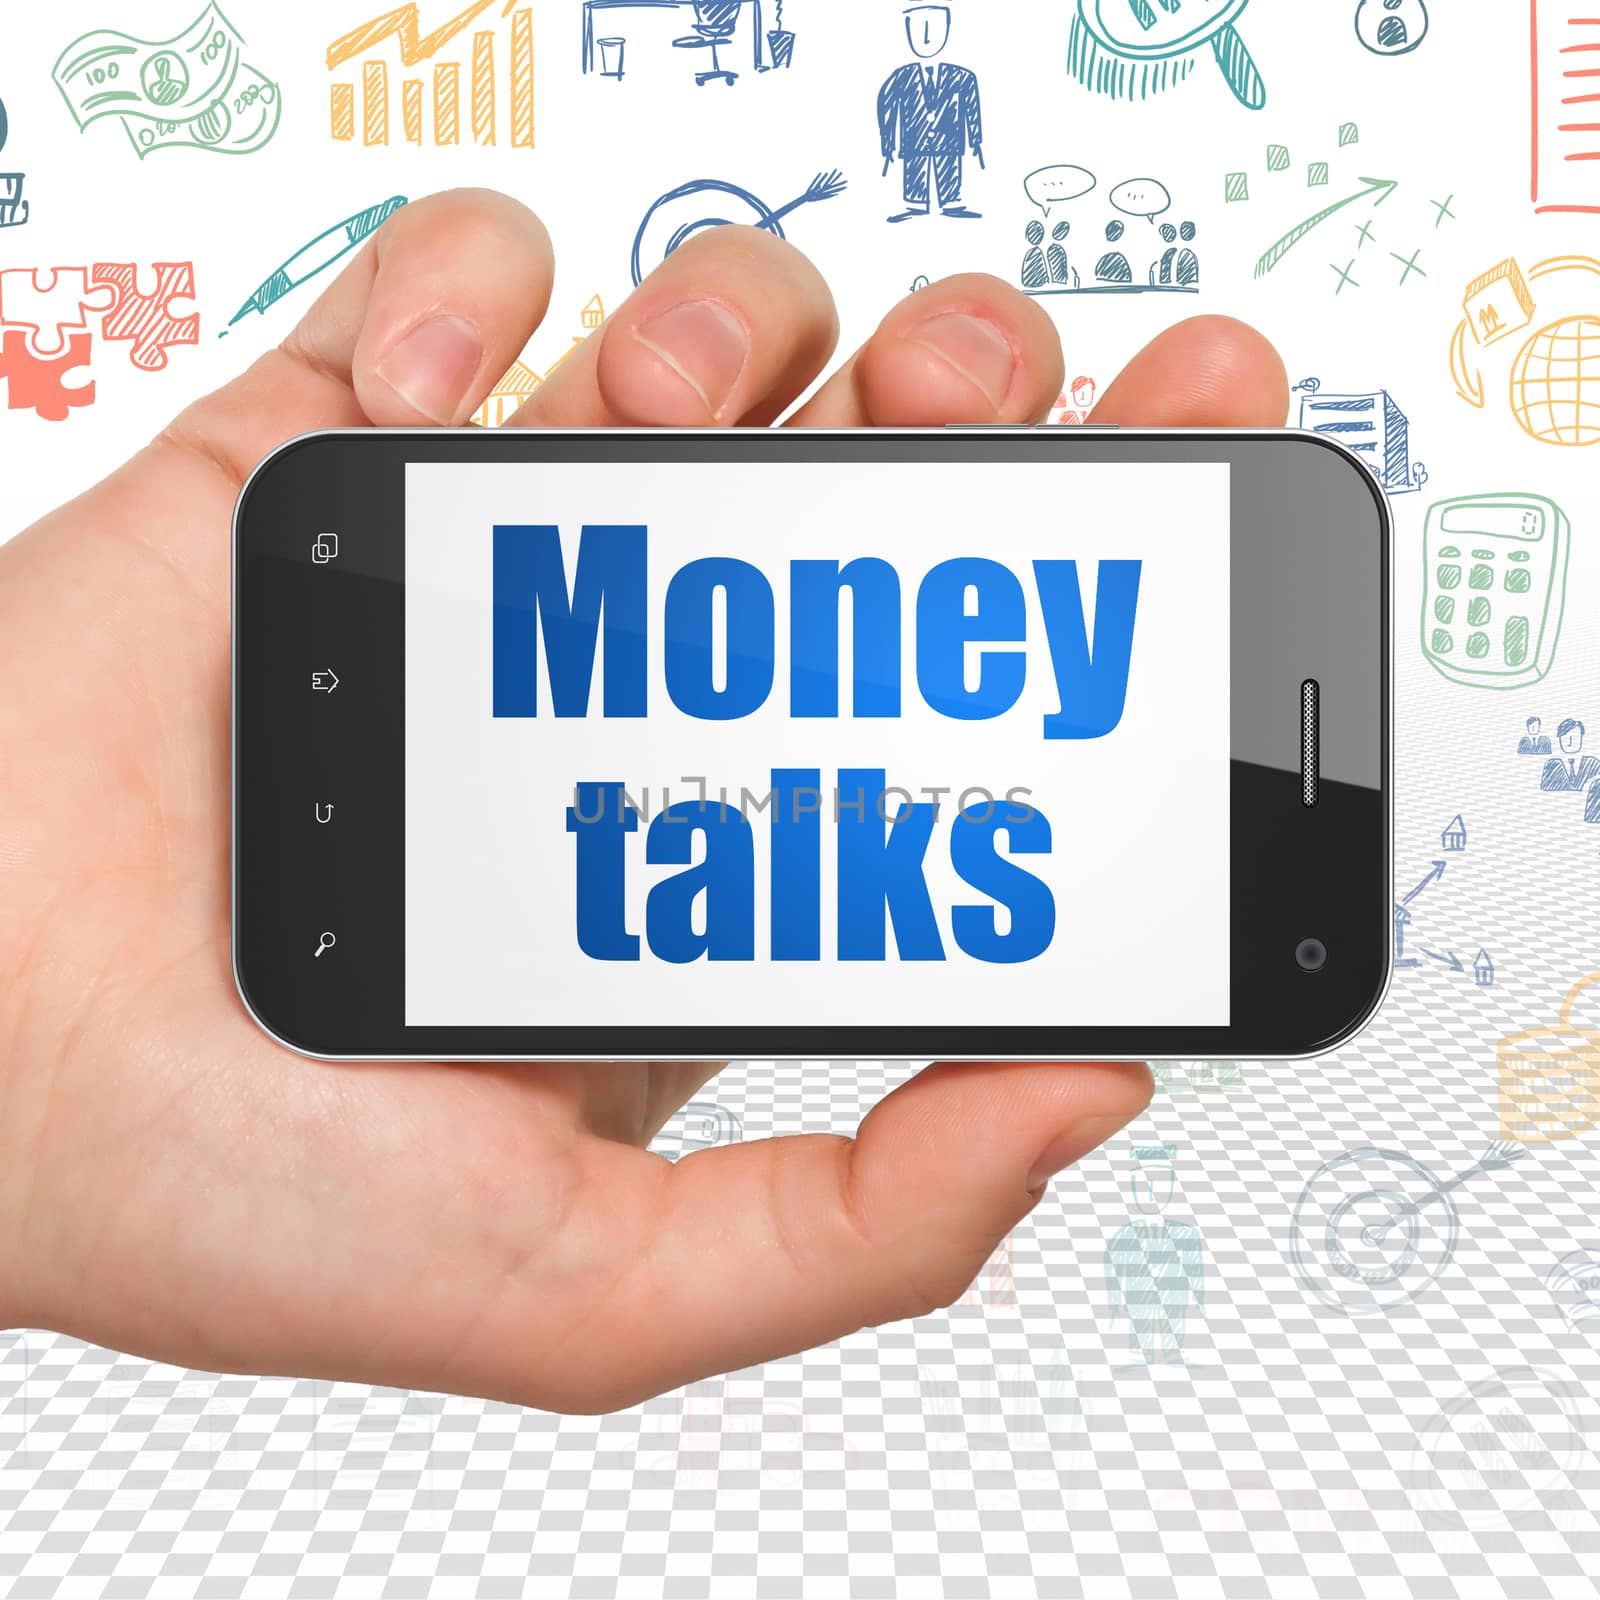 Finance concept: Hand Holding Smartphone with  blue text Money Talks on display,  Hand Drawn Business Icons background